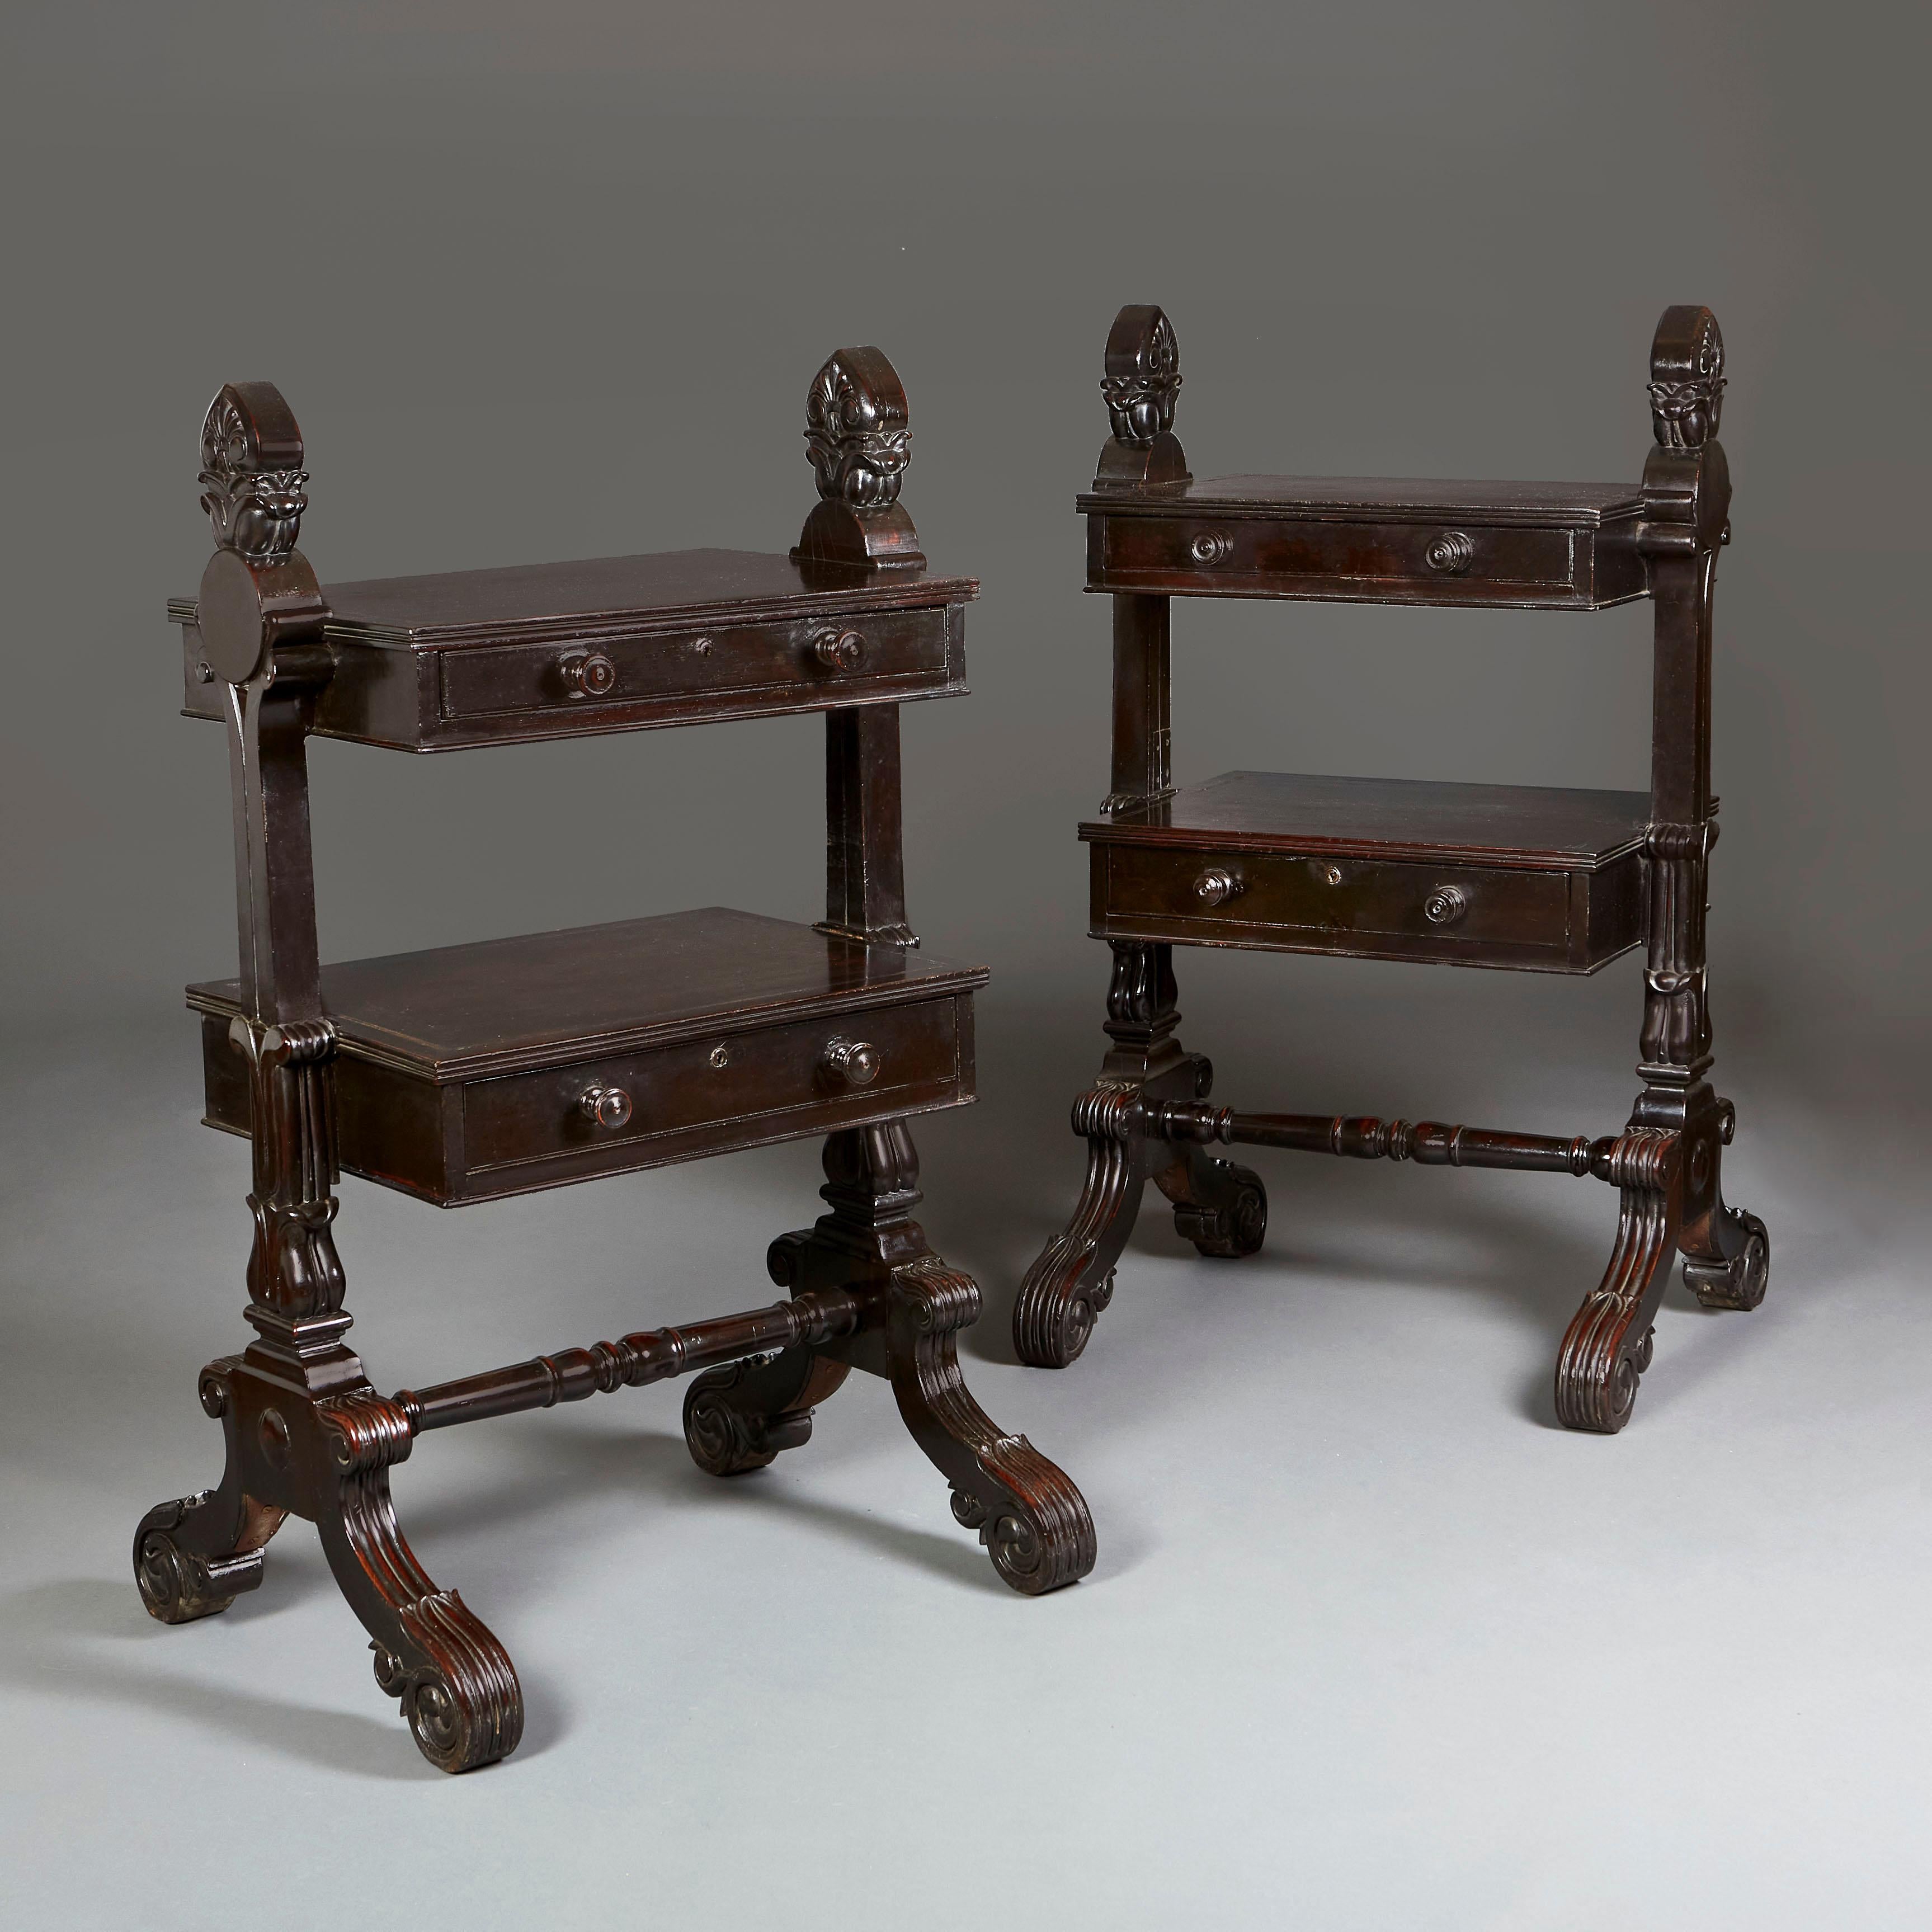 A pair of unusual early nineteenth century Anglo Indian etageres, of ebonised timber, with two floating drawers, boldly carved acanthus finials, supported on splayed legs joined with a cross stretcher.